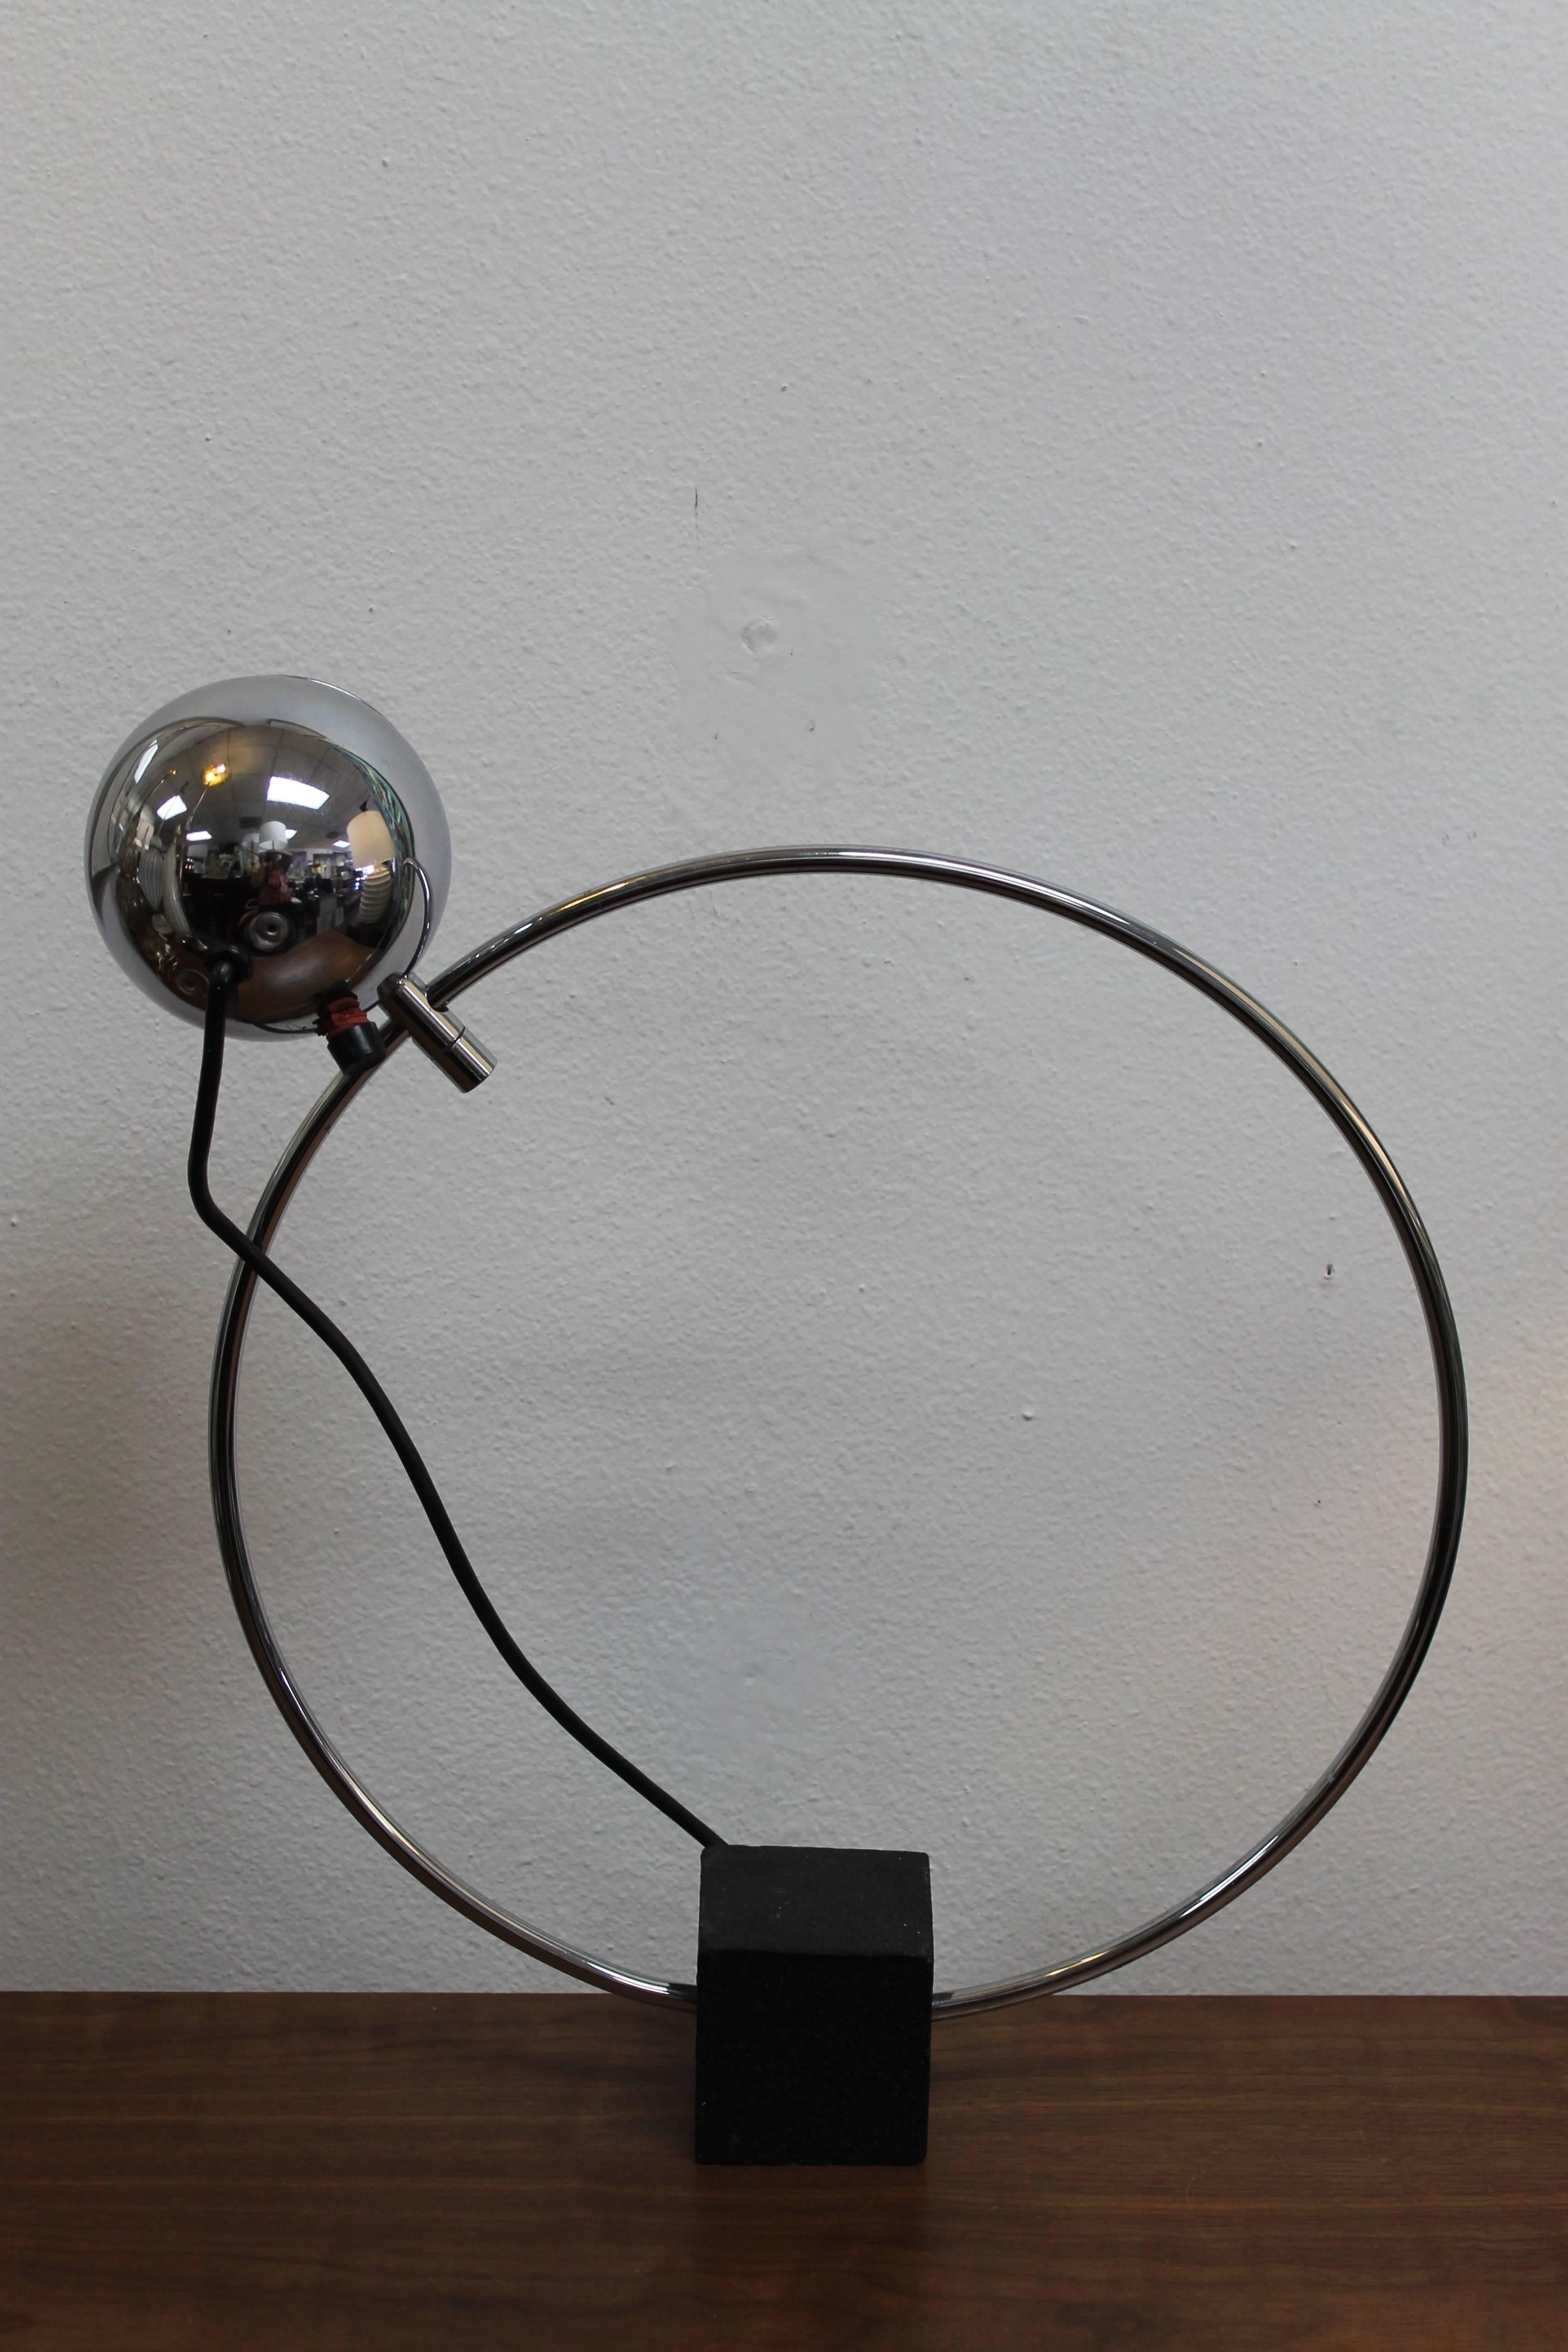 Kovacs table lamp, attributed to Robert Sonneman. Chrome-plated steel, enameled steel base. Measures: 16” diameter. Base is 3” wide, deep and high. Total height is 17.5